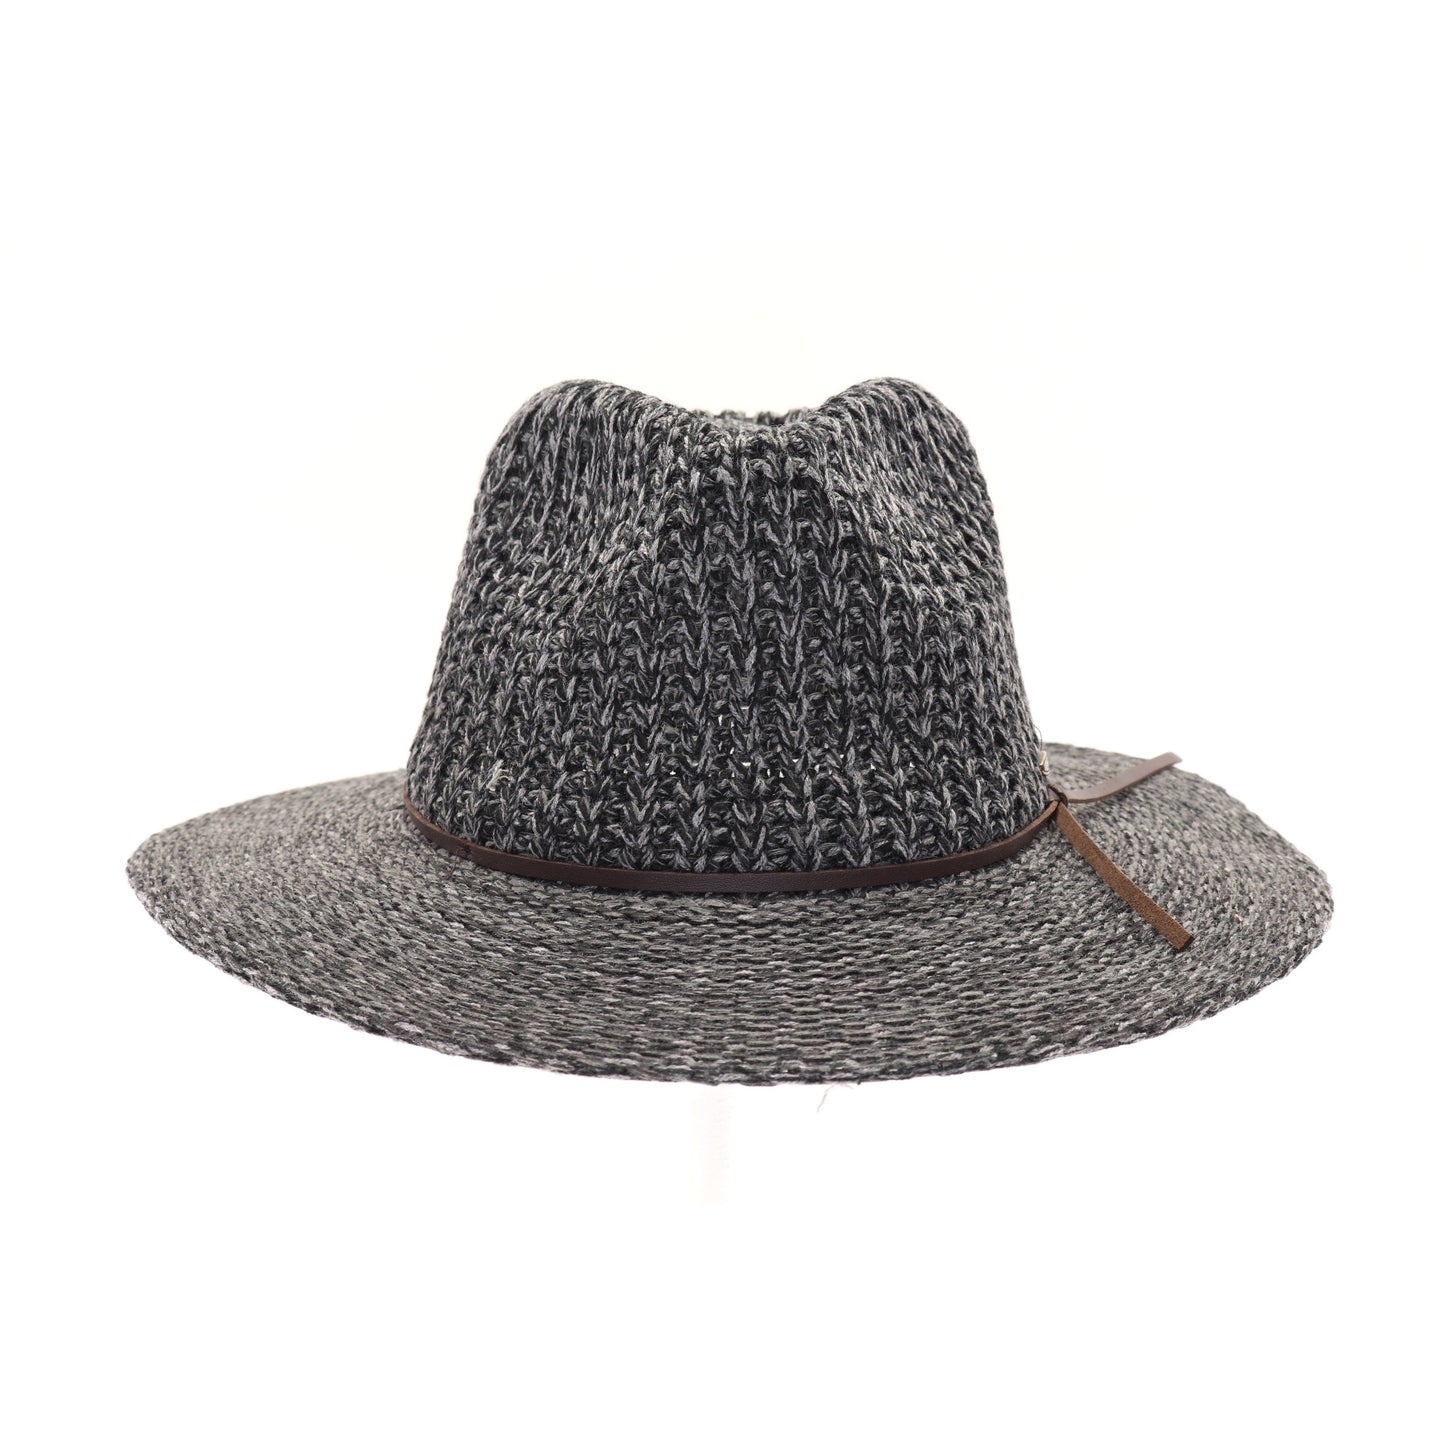 Knit Fedora Hat with Leather Cord